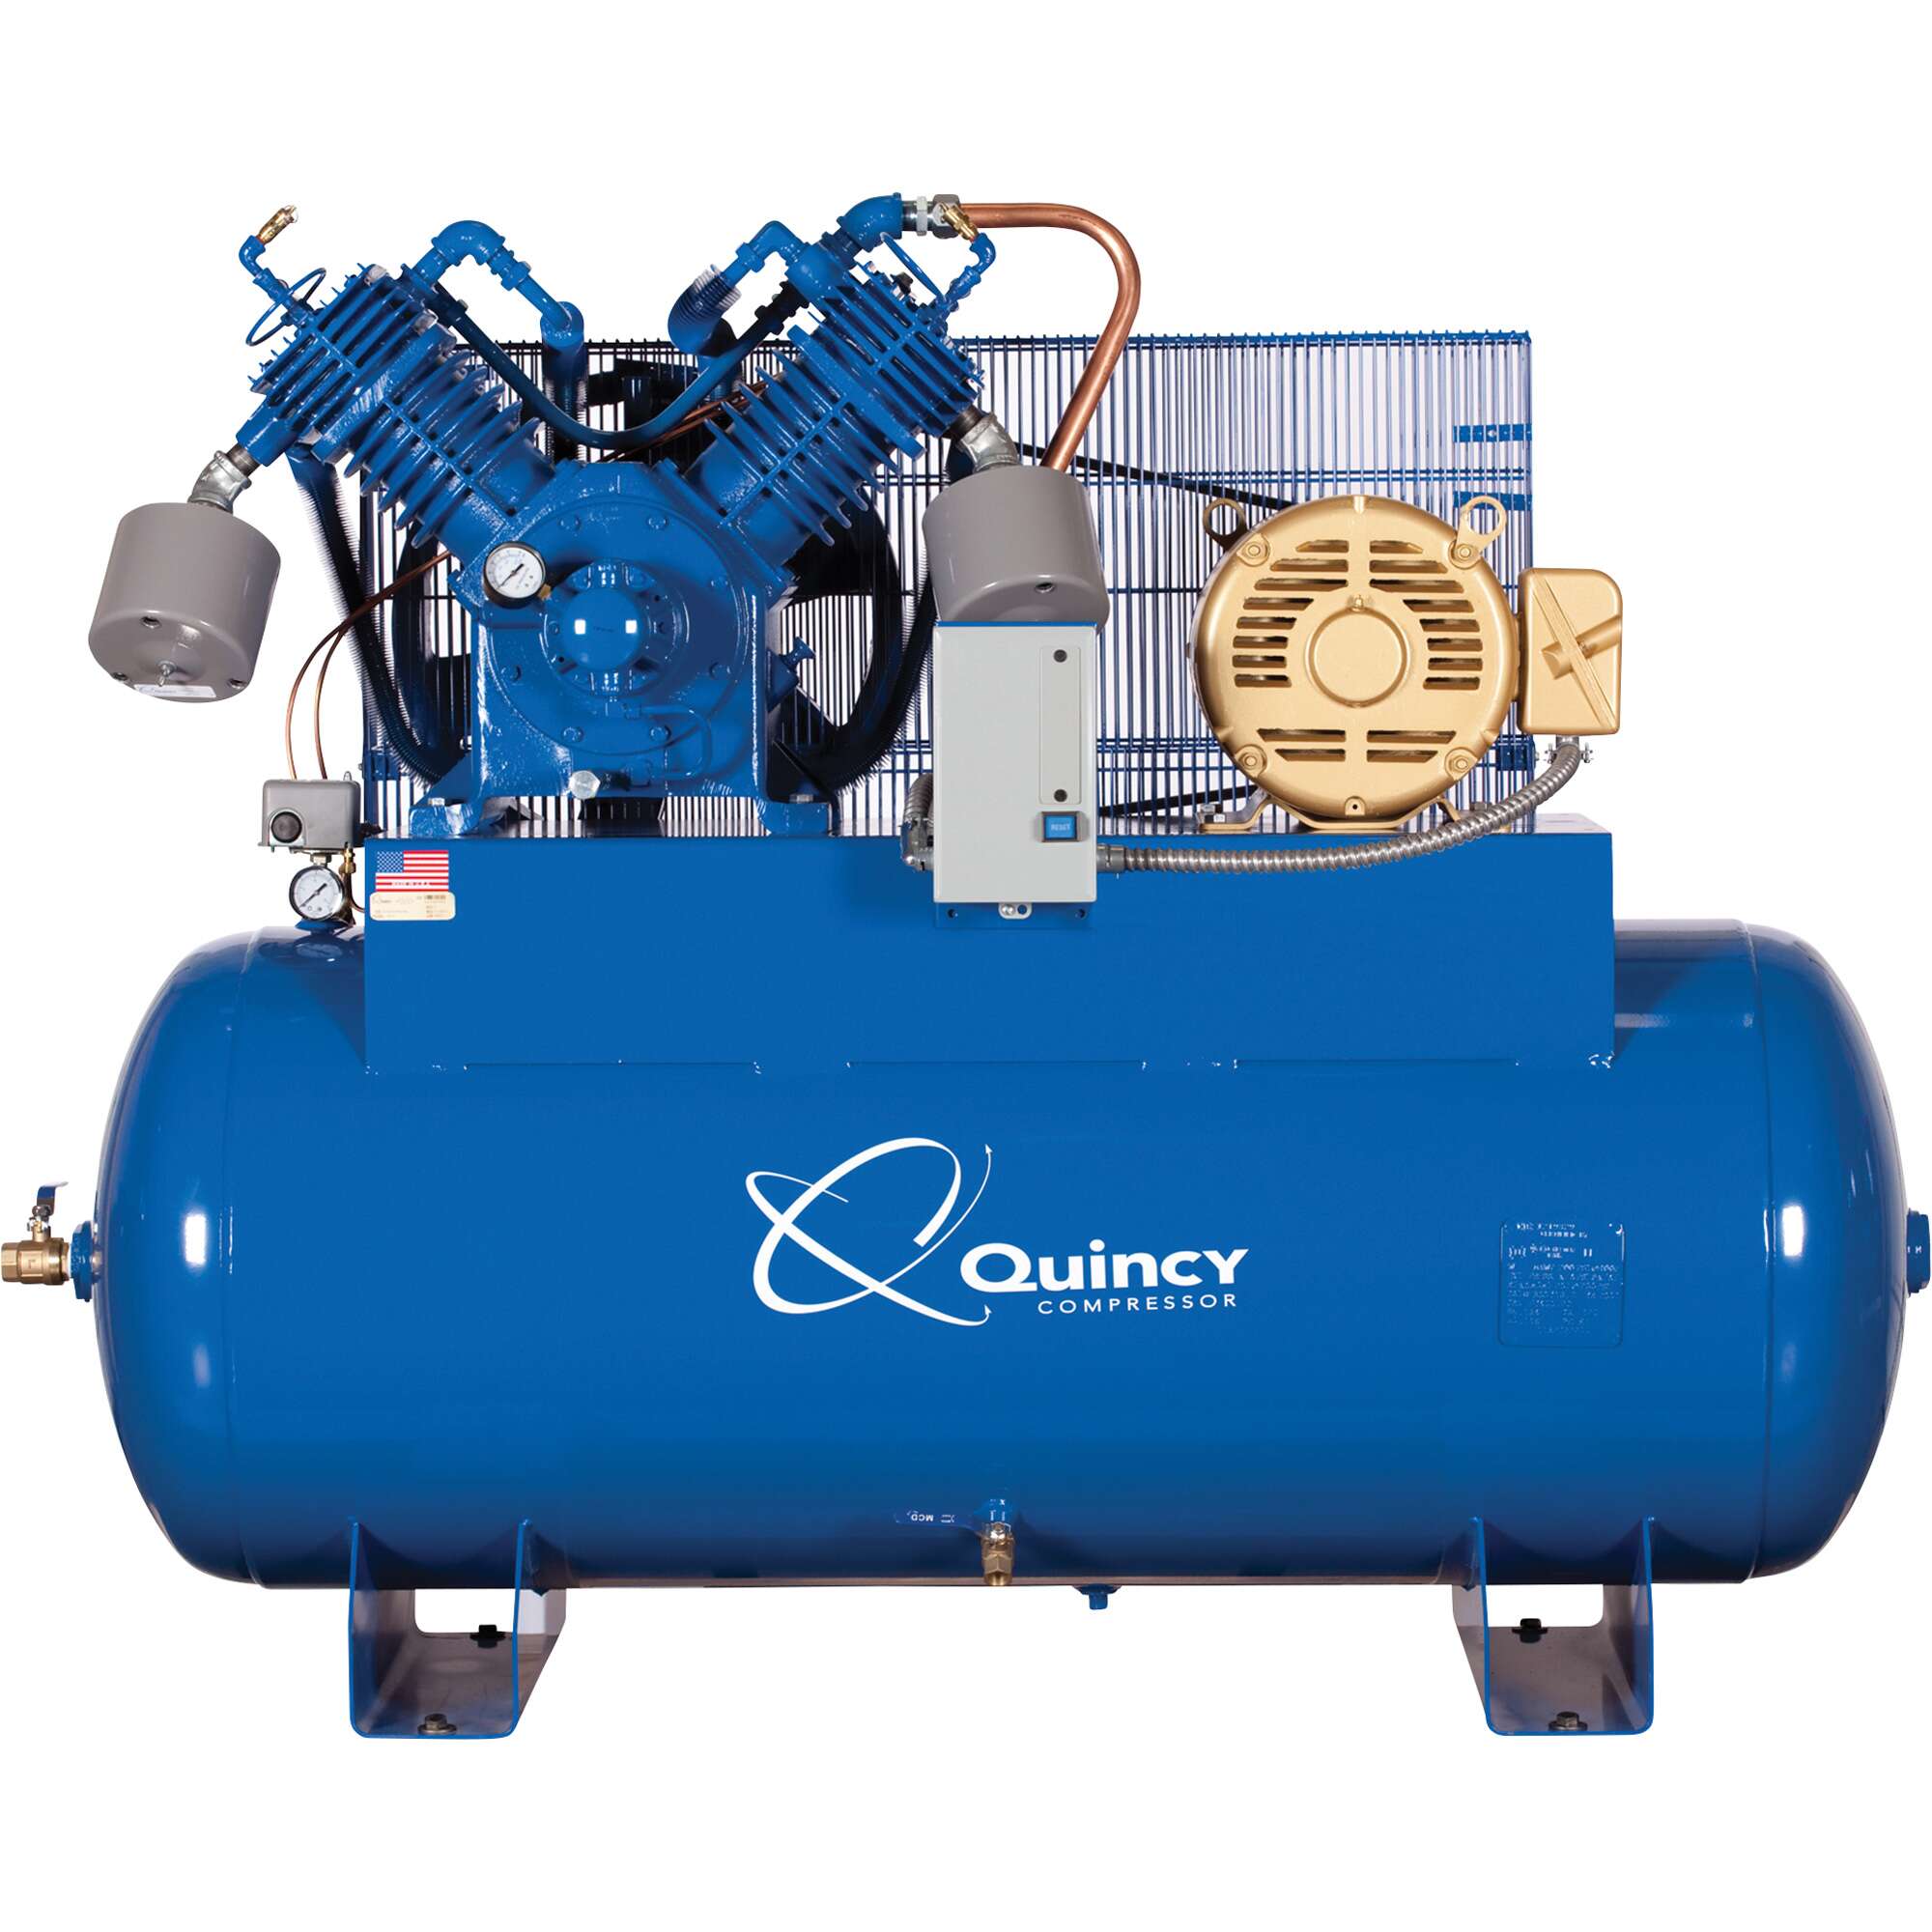 Quincy QP MAX Pressure Lubricated Reciprocating Air Compressor 15 HP 230 Volt 3 Phase 120 Gallon Horizontal